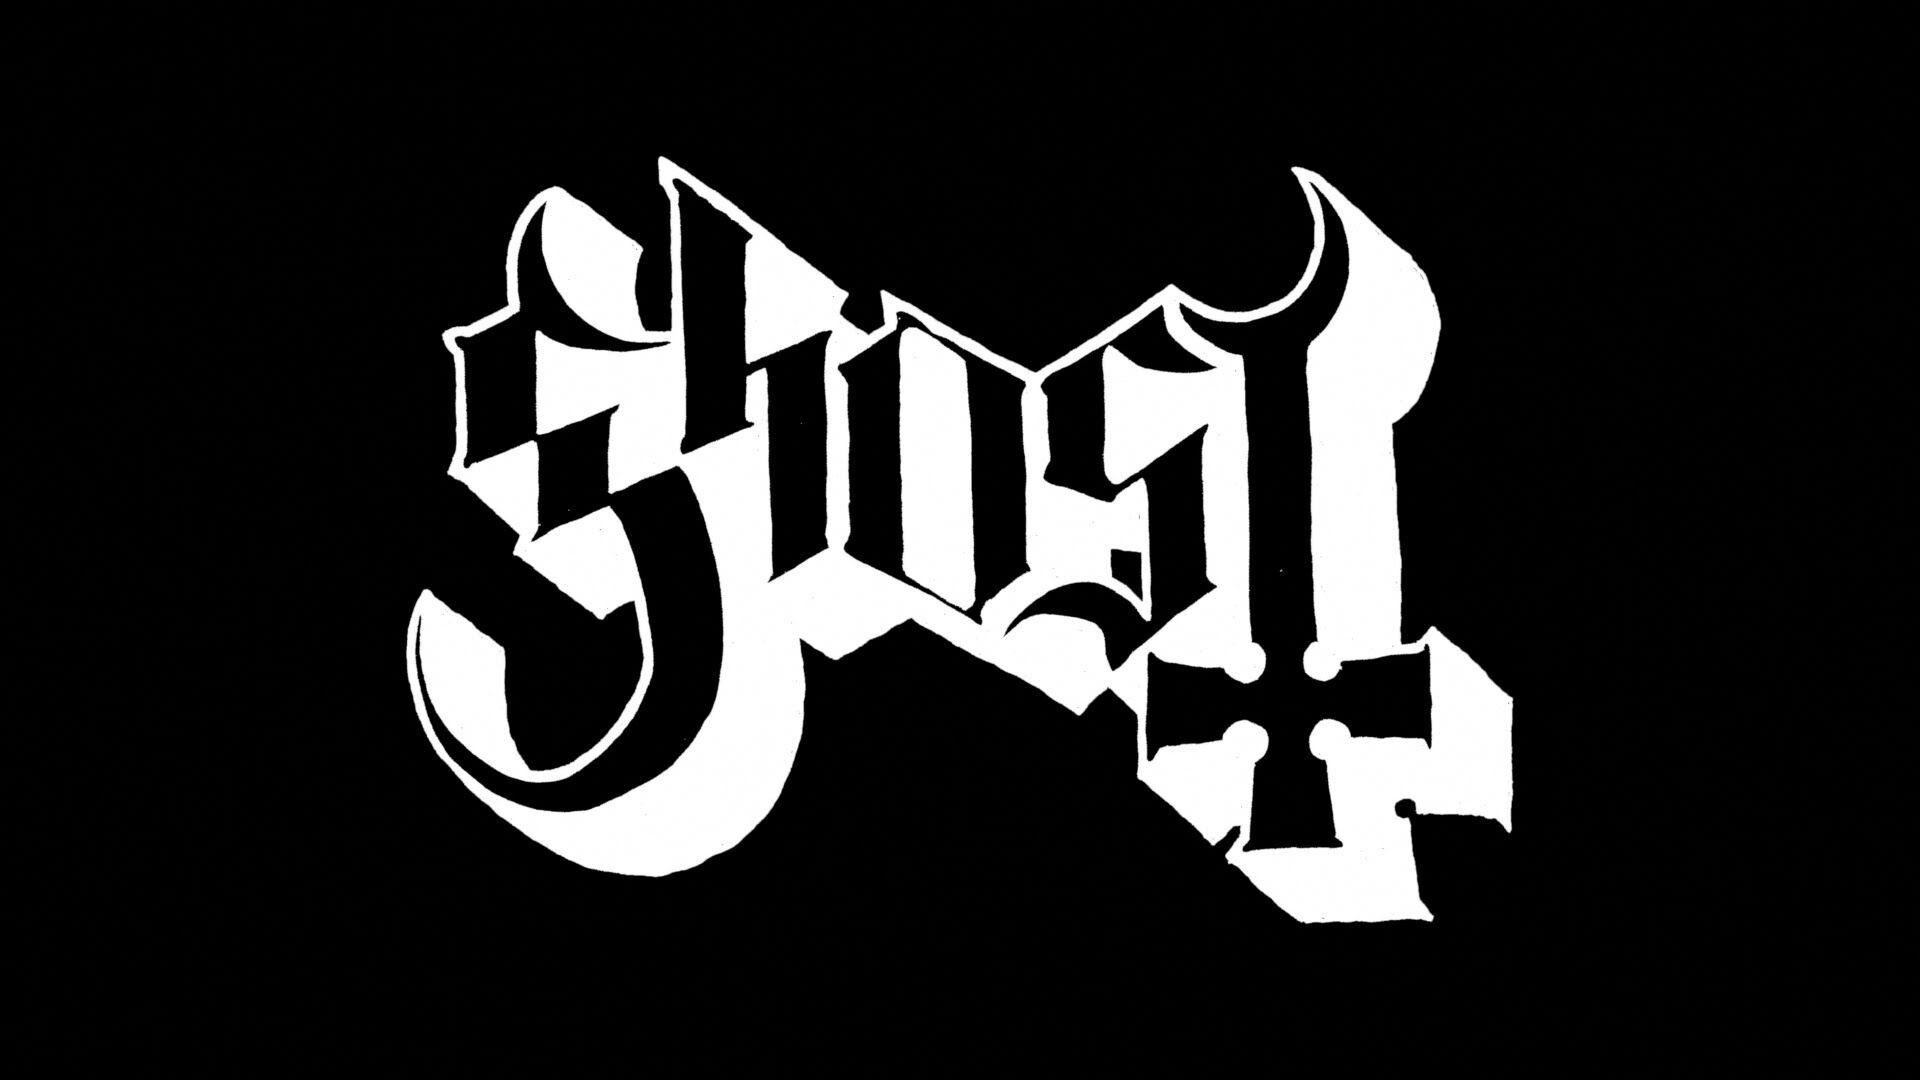 Ghost (Band): The single, "Rats", was released ahead of the album on 13 April 2018. 1920x1080 Full HD Wallpaper.